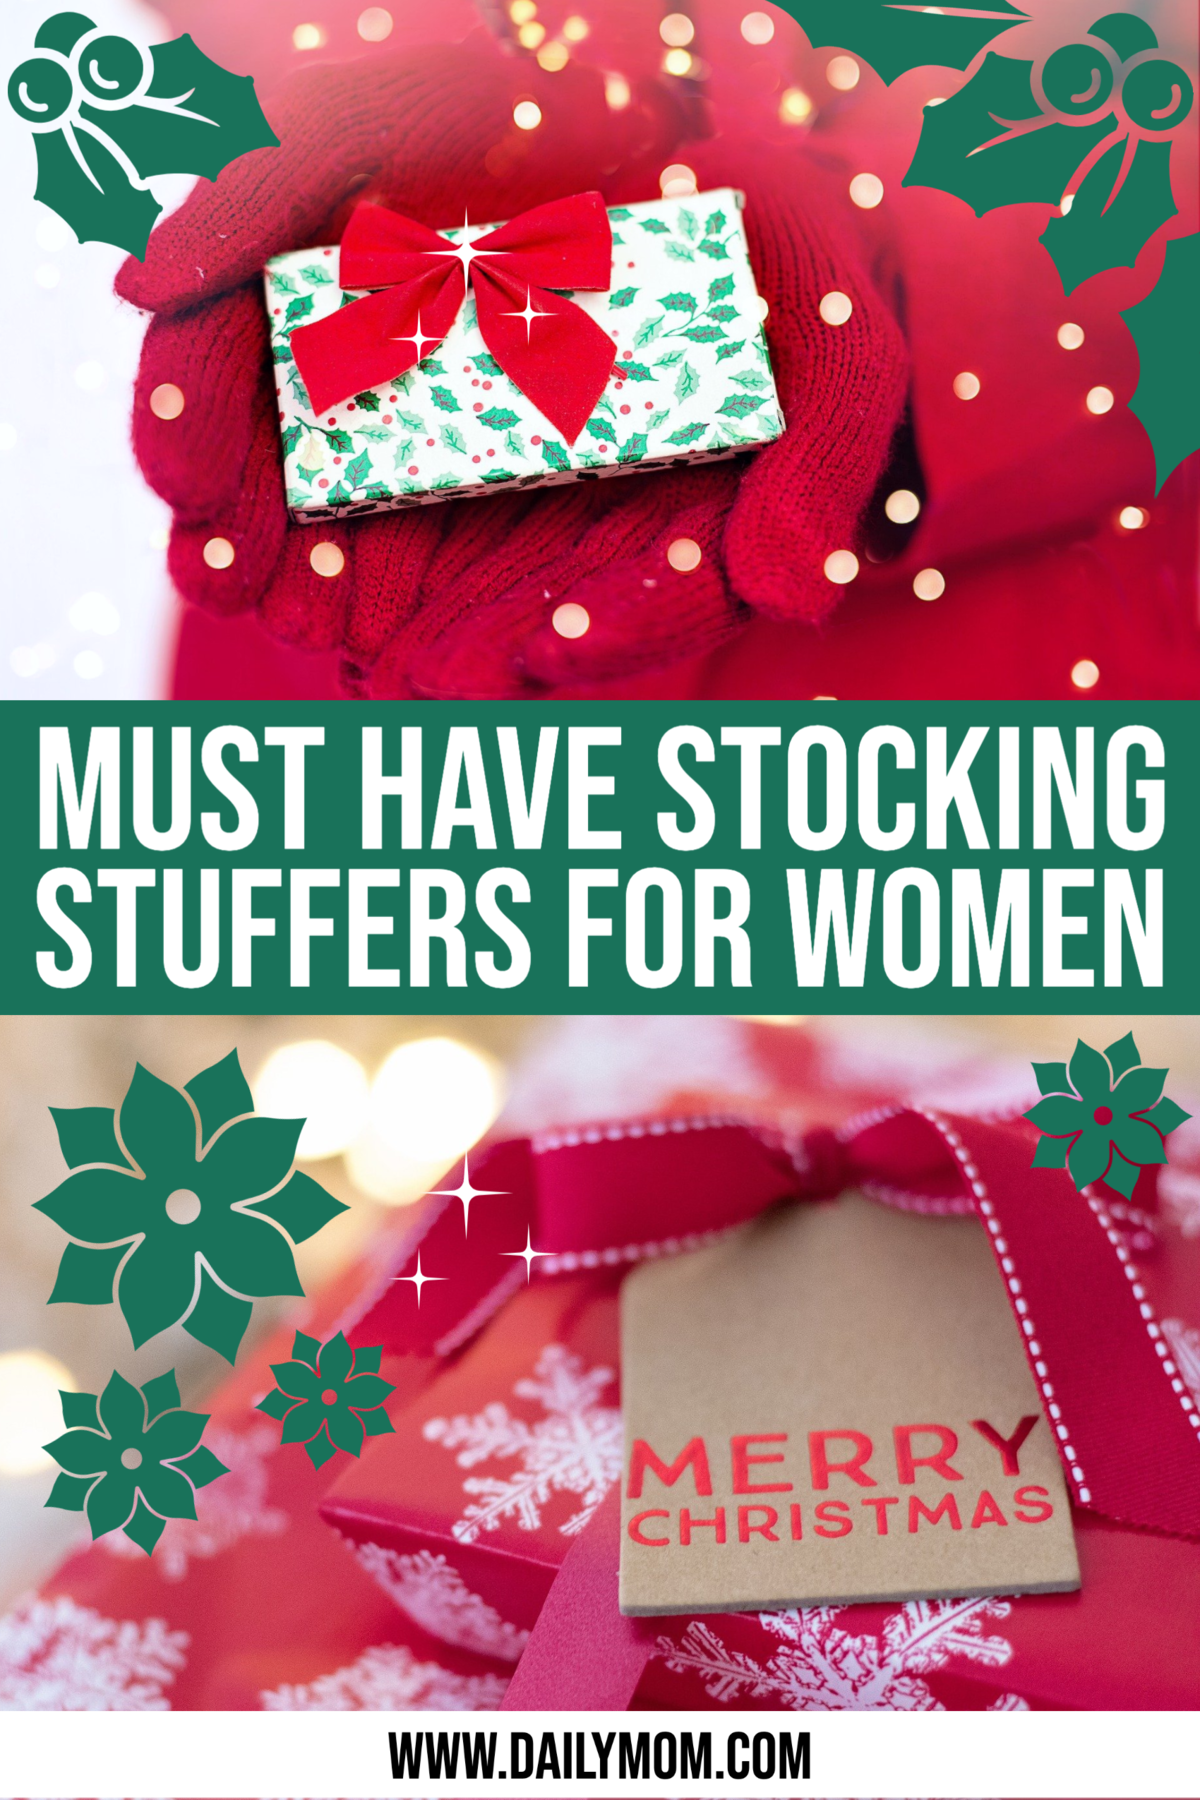 25 MustHave Stocking Stuffers For Women She's Sure To Love